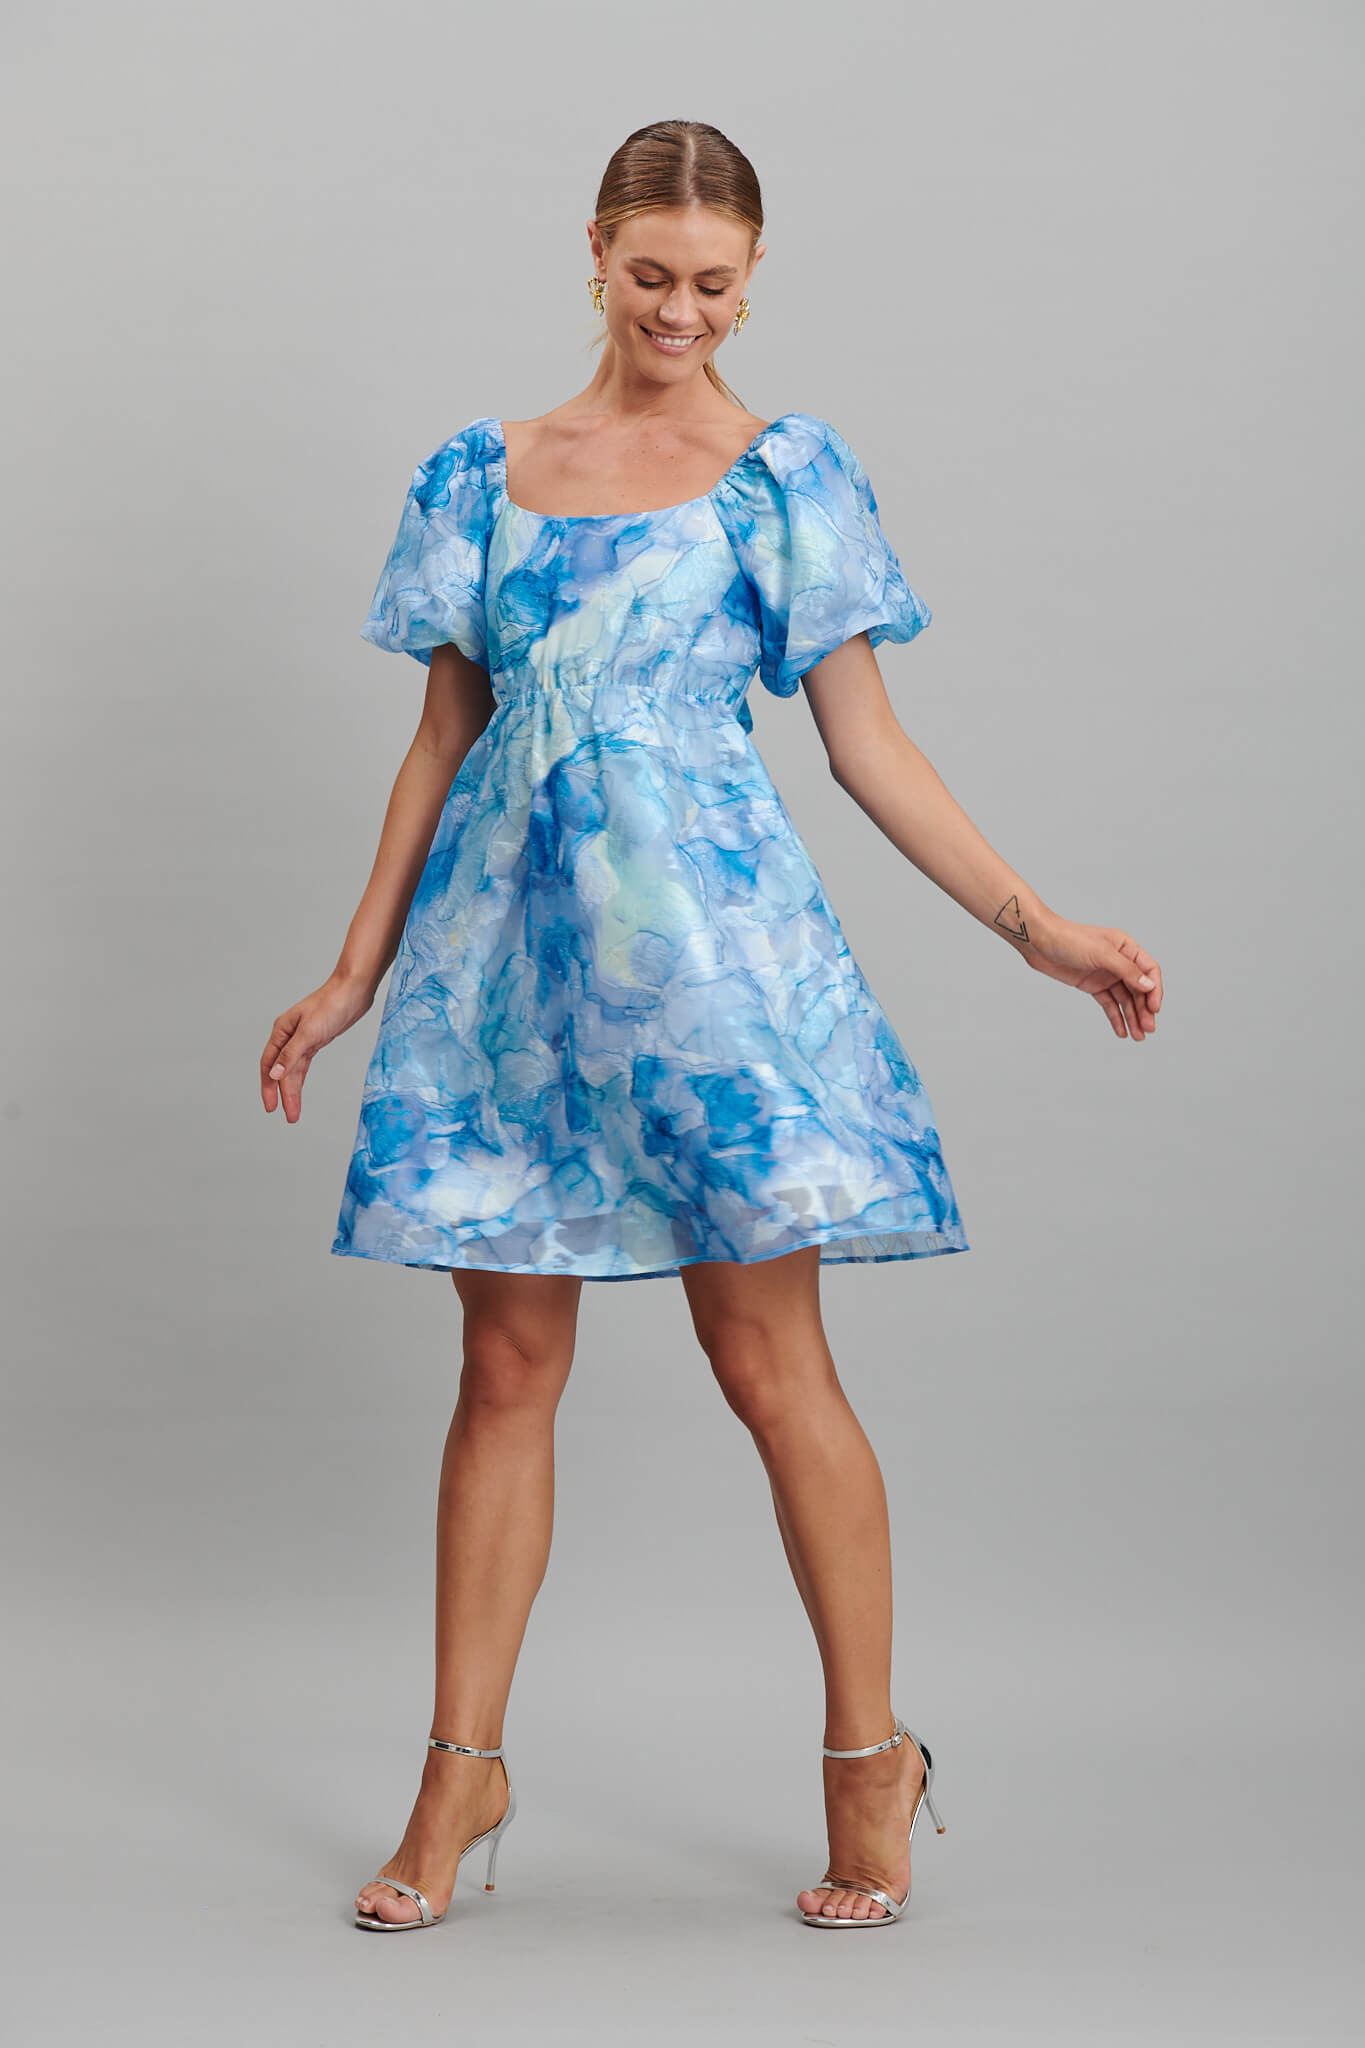 Sunset Sky Dress In Blue Floral Organza - full length